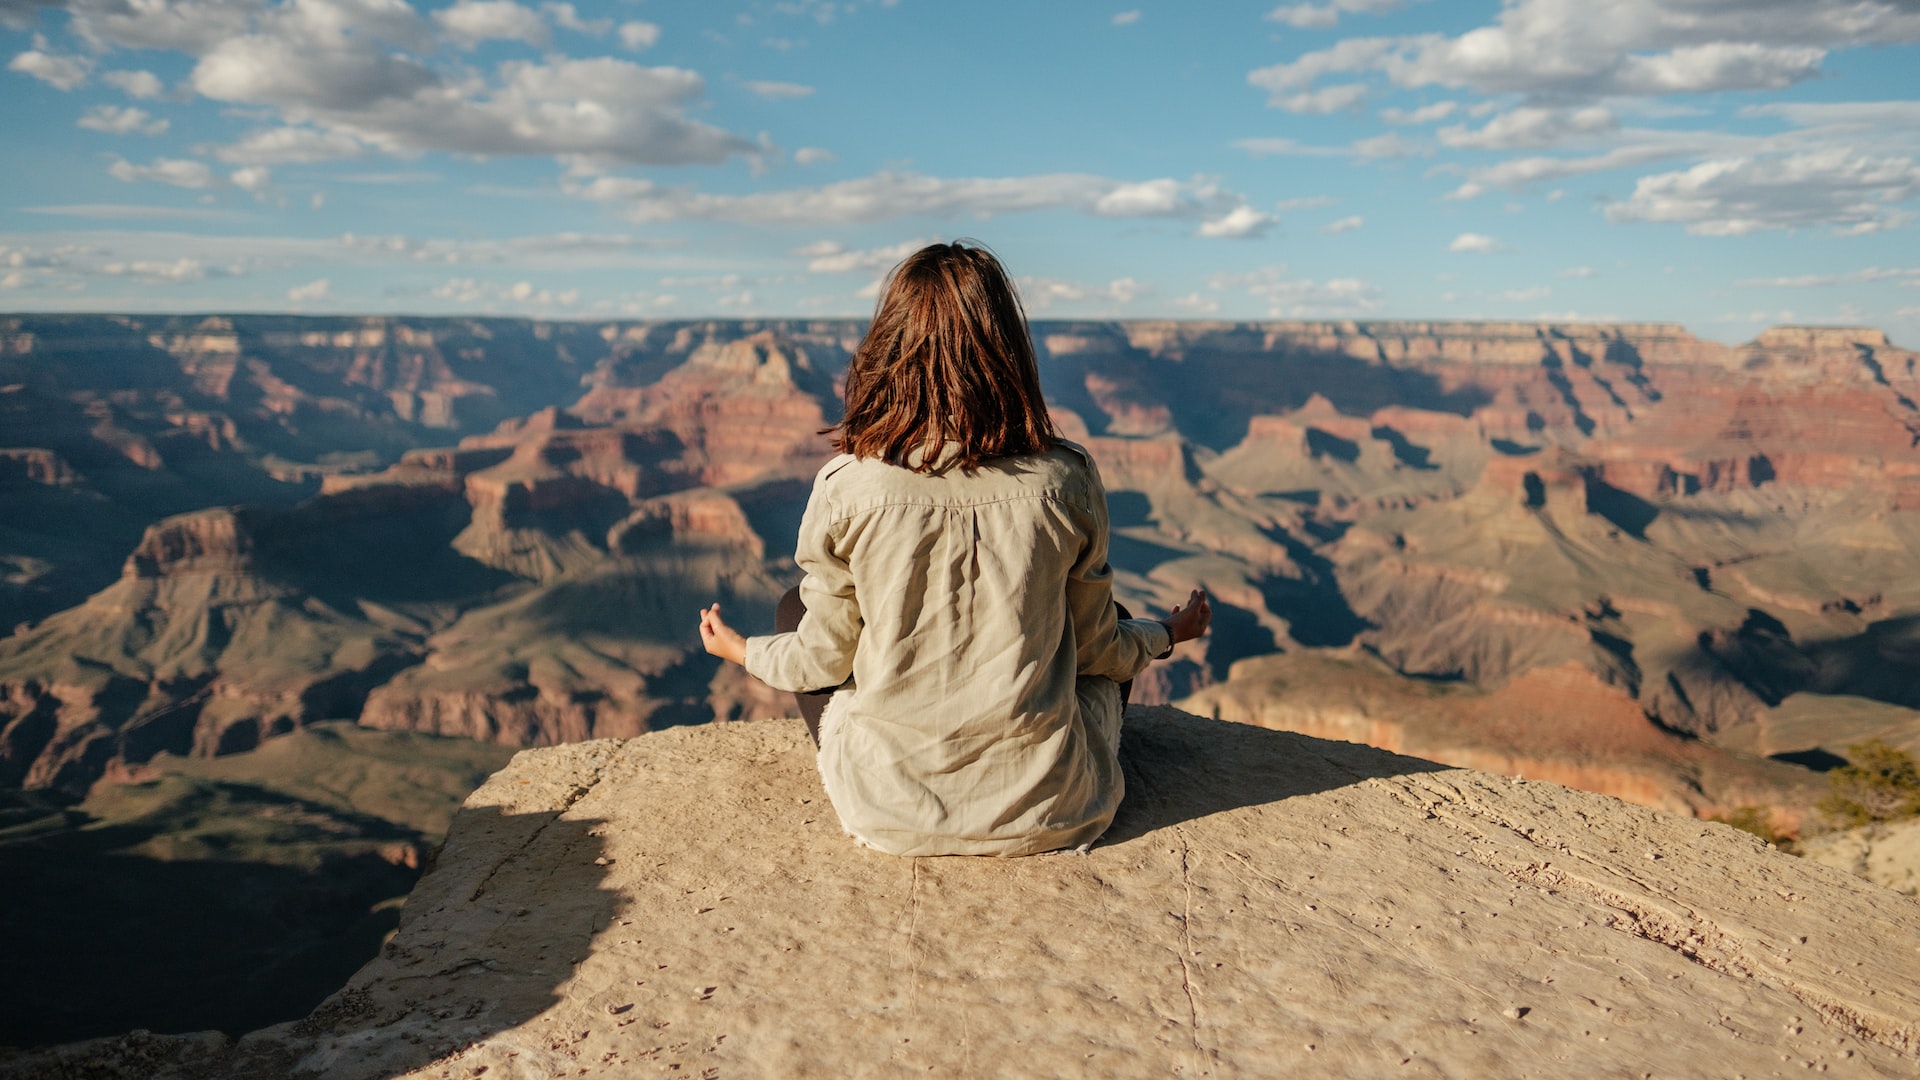 A woman meditating at the edge of the grand canyon.